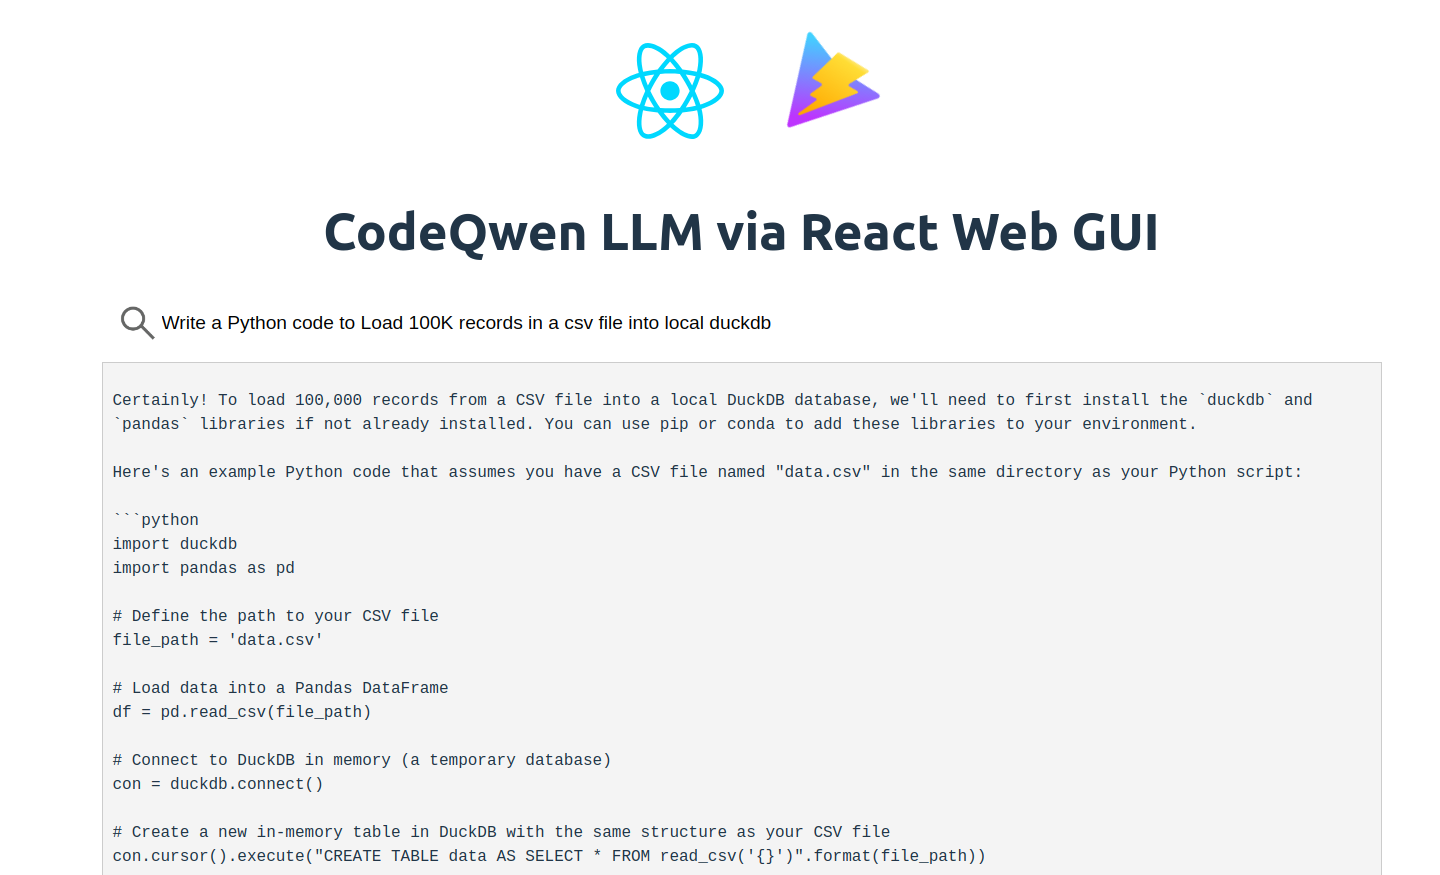 Chat with CodeQwen CodeLLM via React